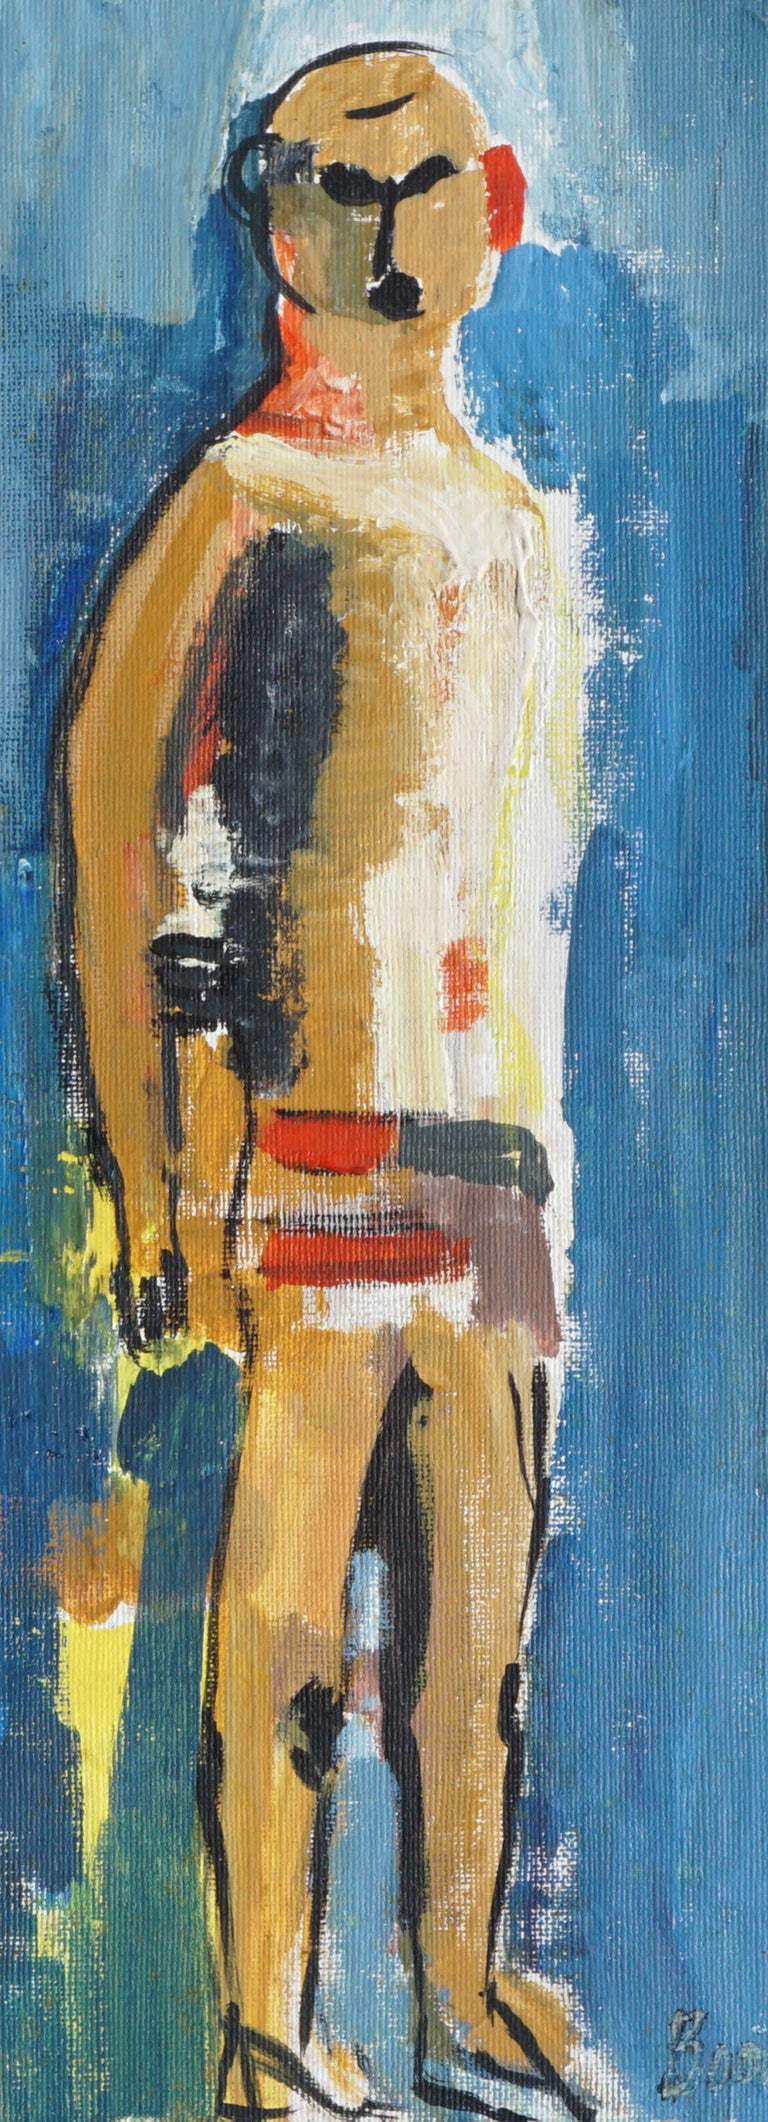 Bathing Suit Couple, Bay Area Figurative Abstract In Style of David Park - Gray Figurative Painting by Boothe